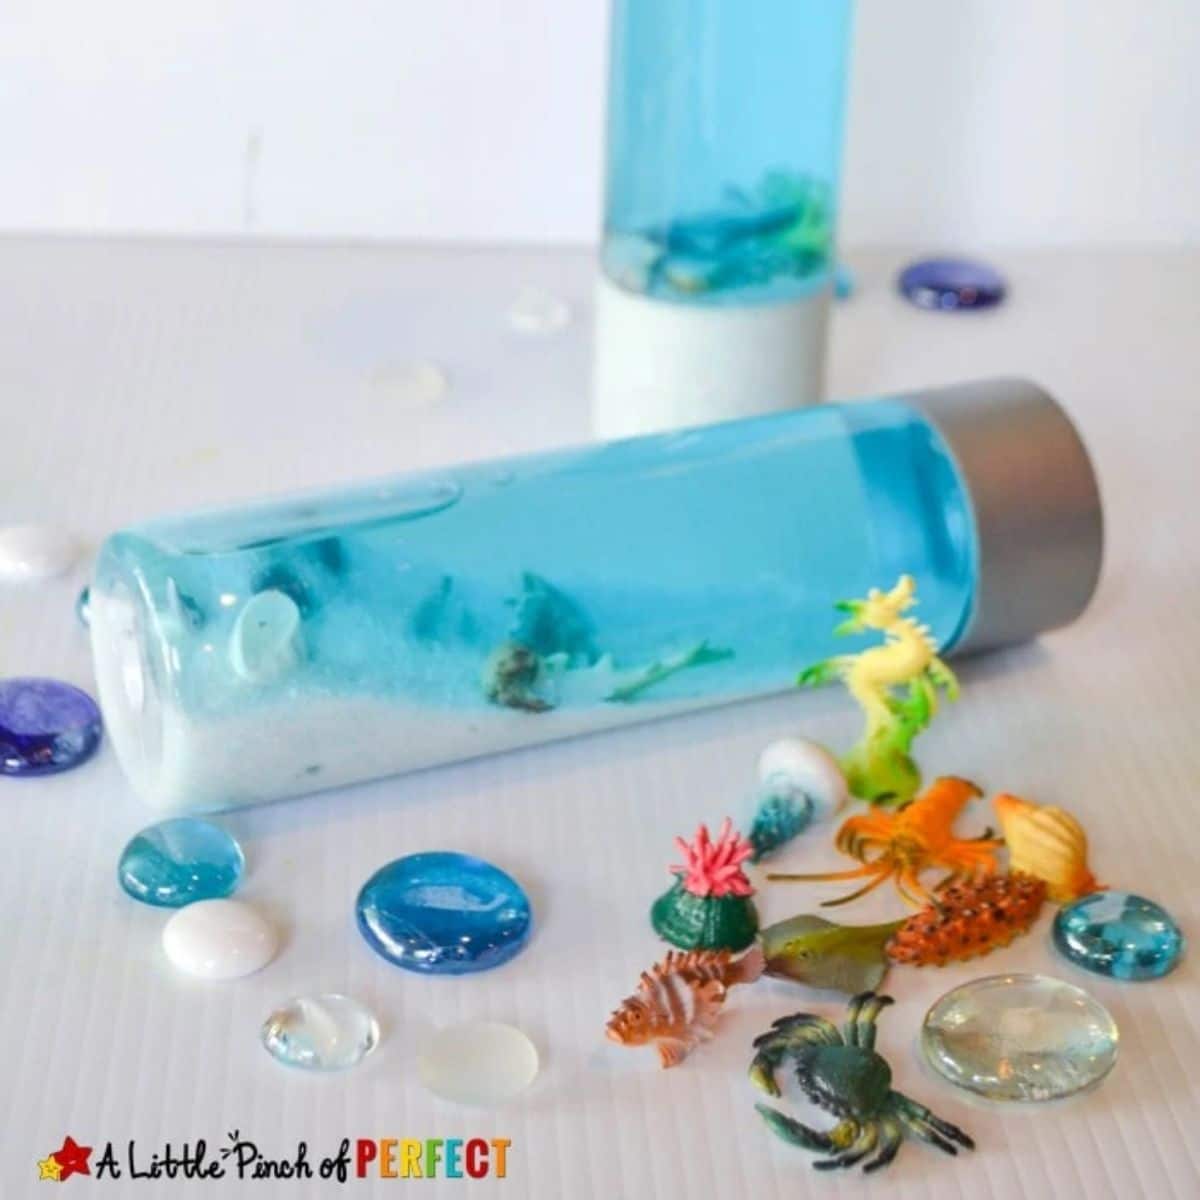 a water bottle is laid down filled with white sand, blue water and toy sea creatures. Other sea creatures are scattered in front of it